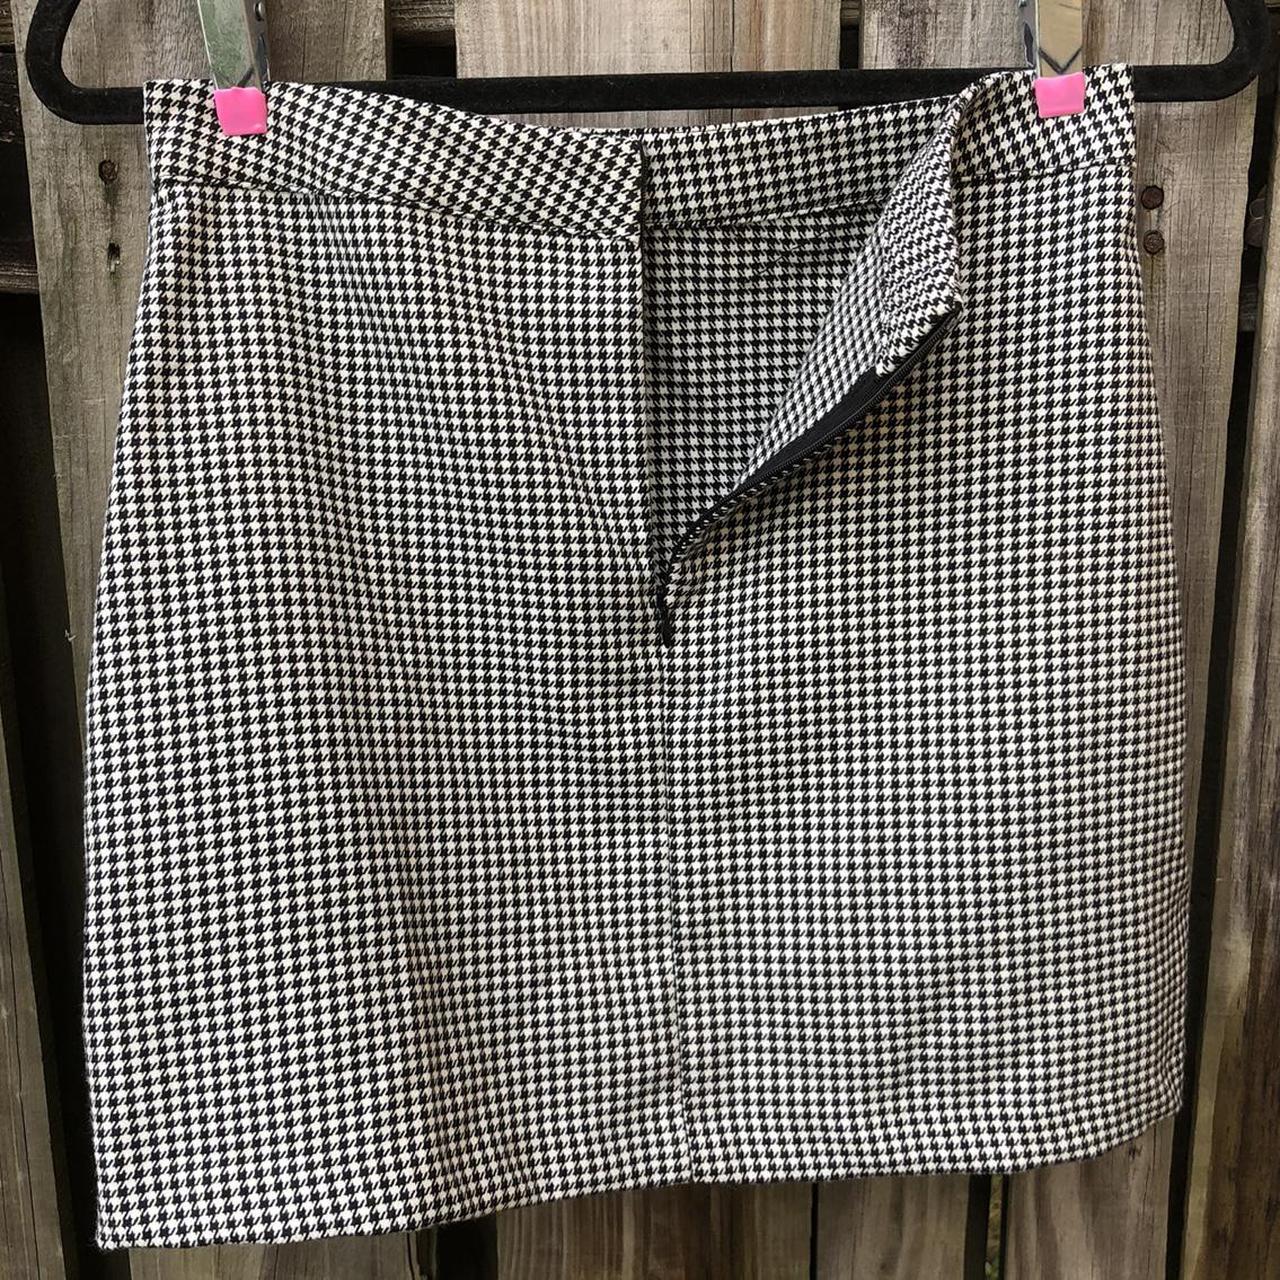 Product Image 4 - Asymmetrical houndstooth skirt with frayed